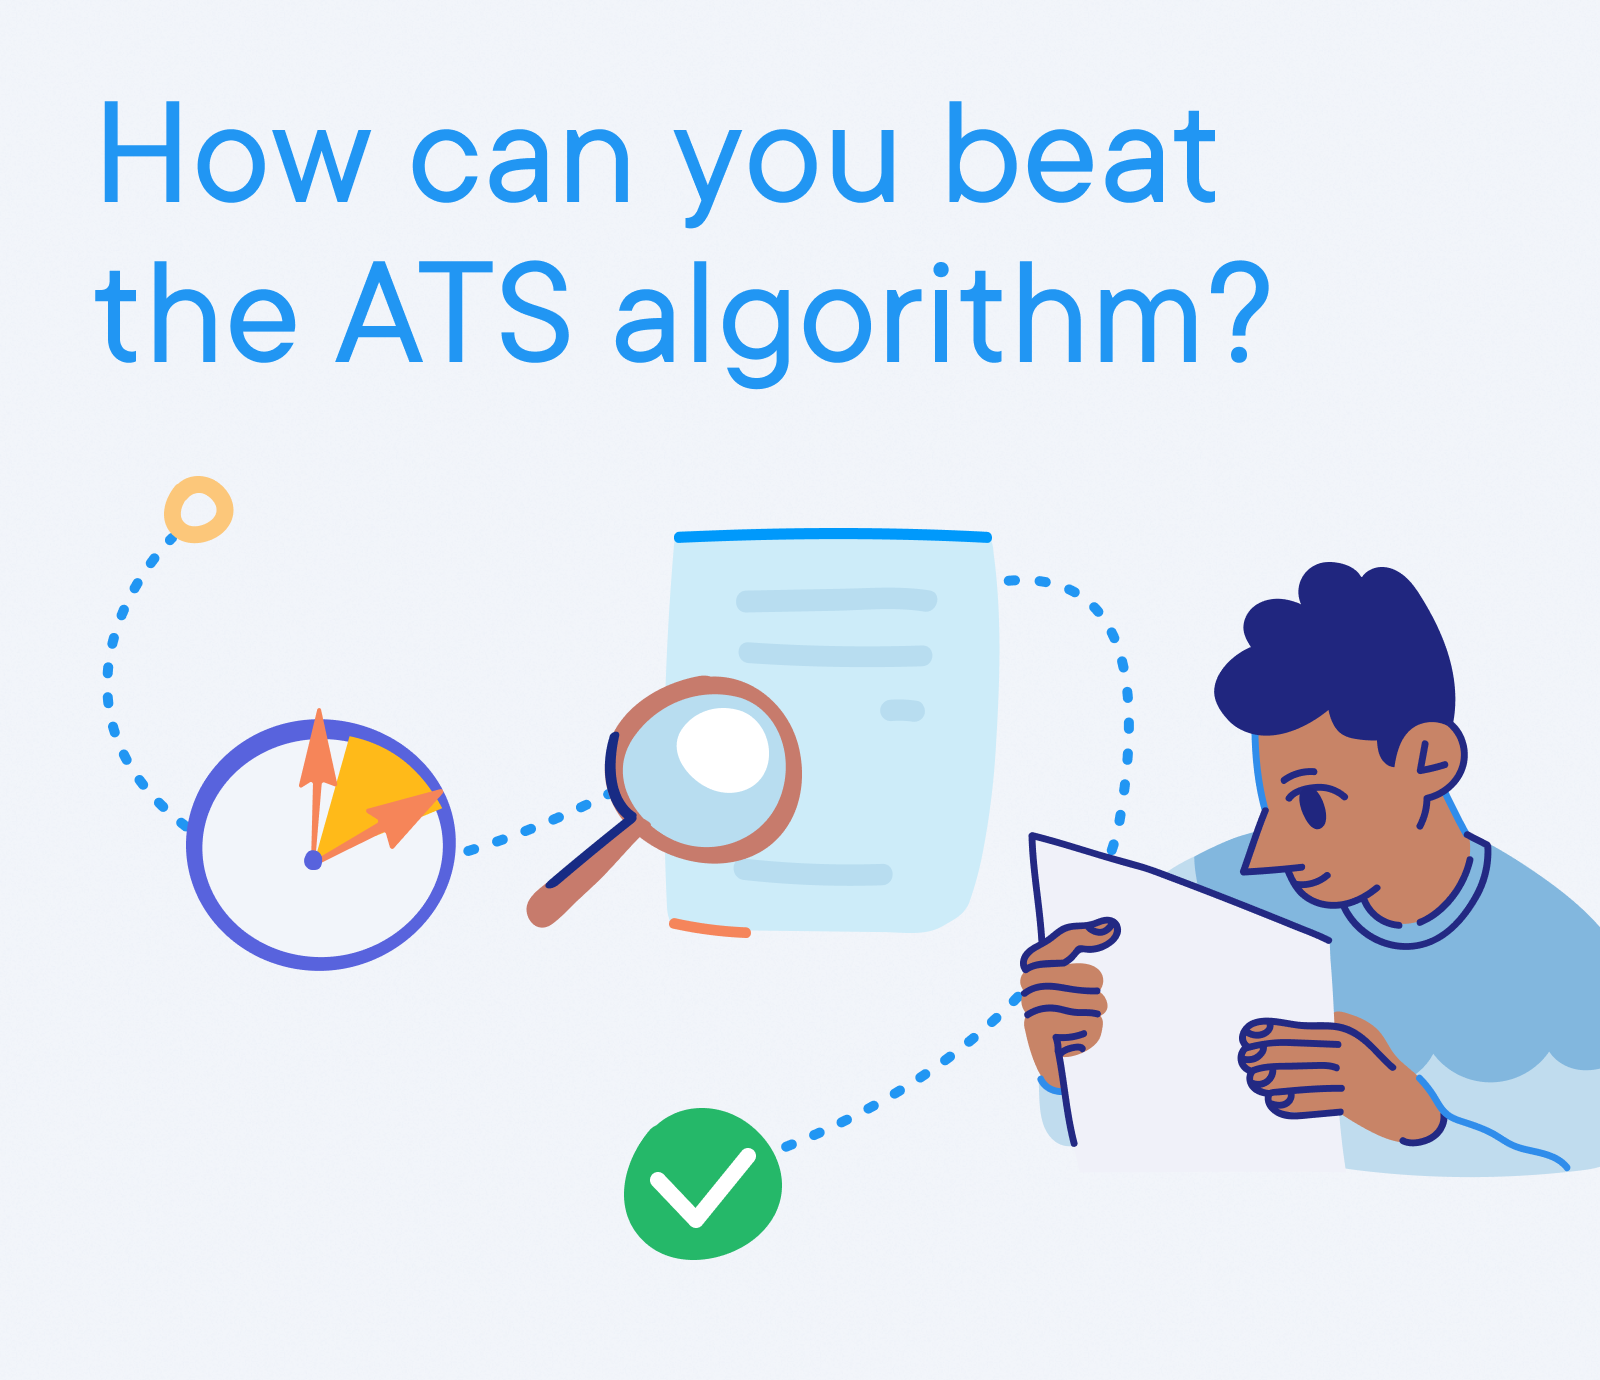 Business Development Manager - How can you beat the ATS algorithm?